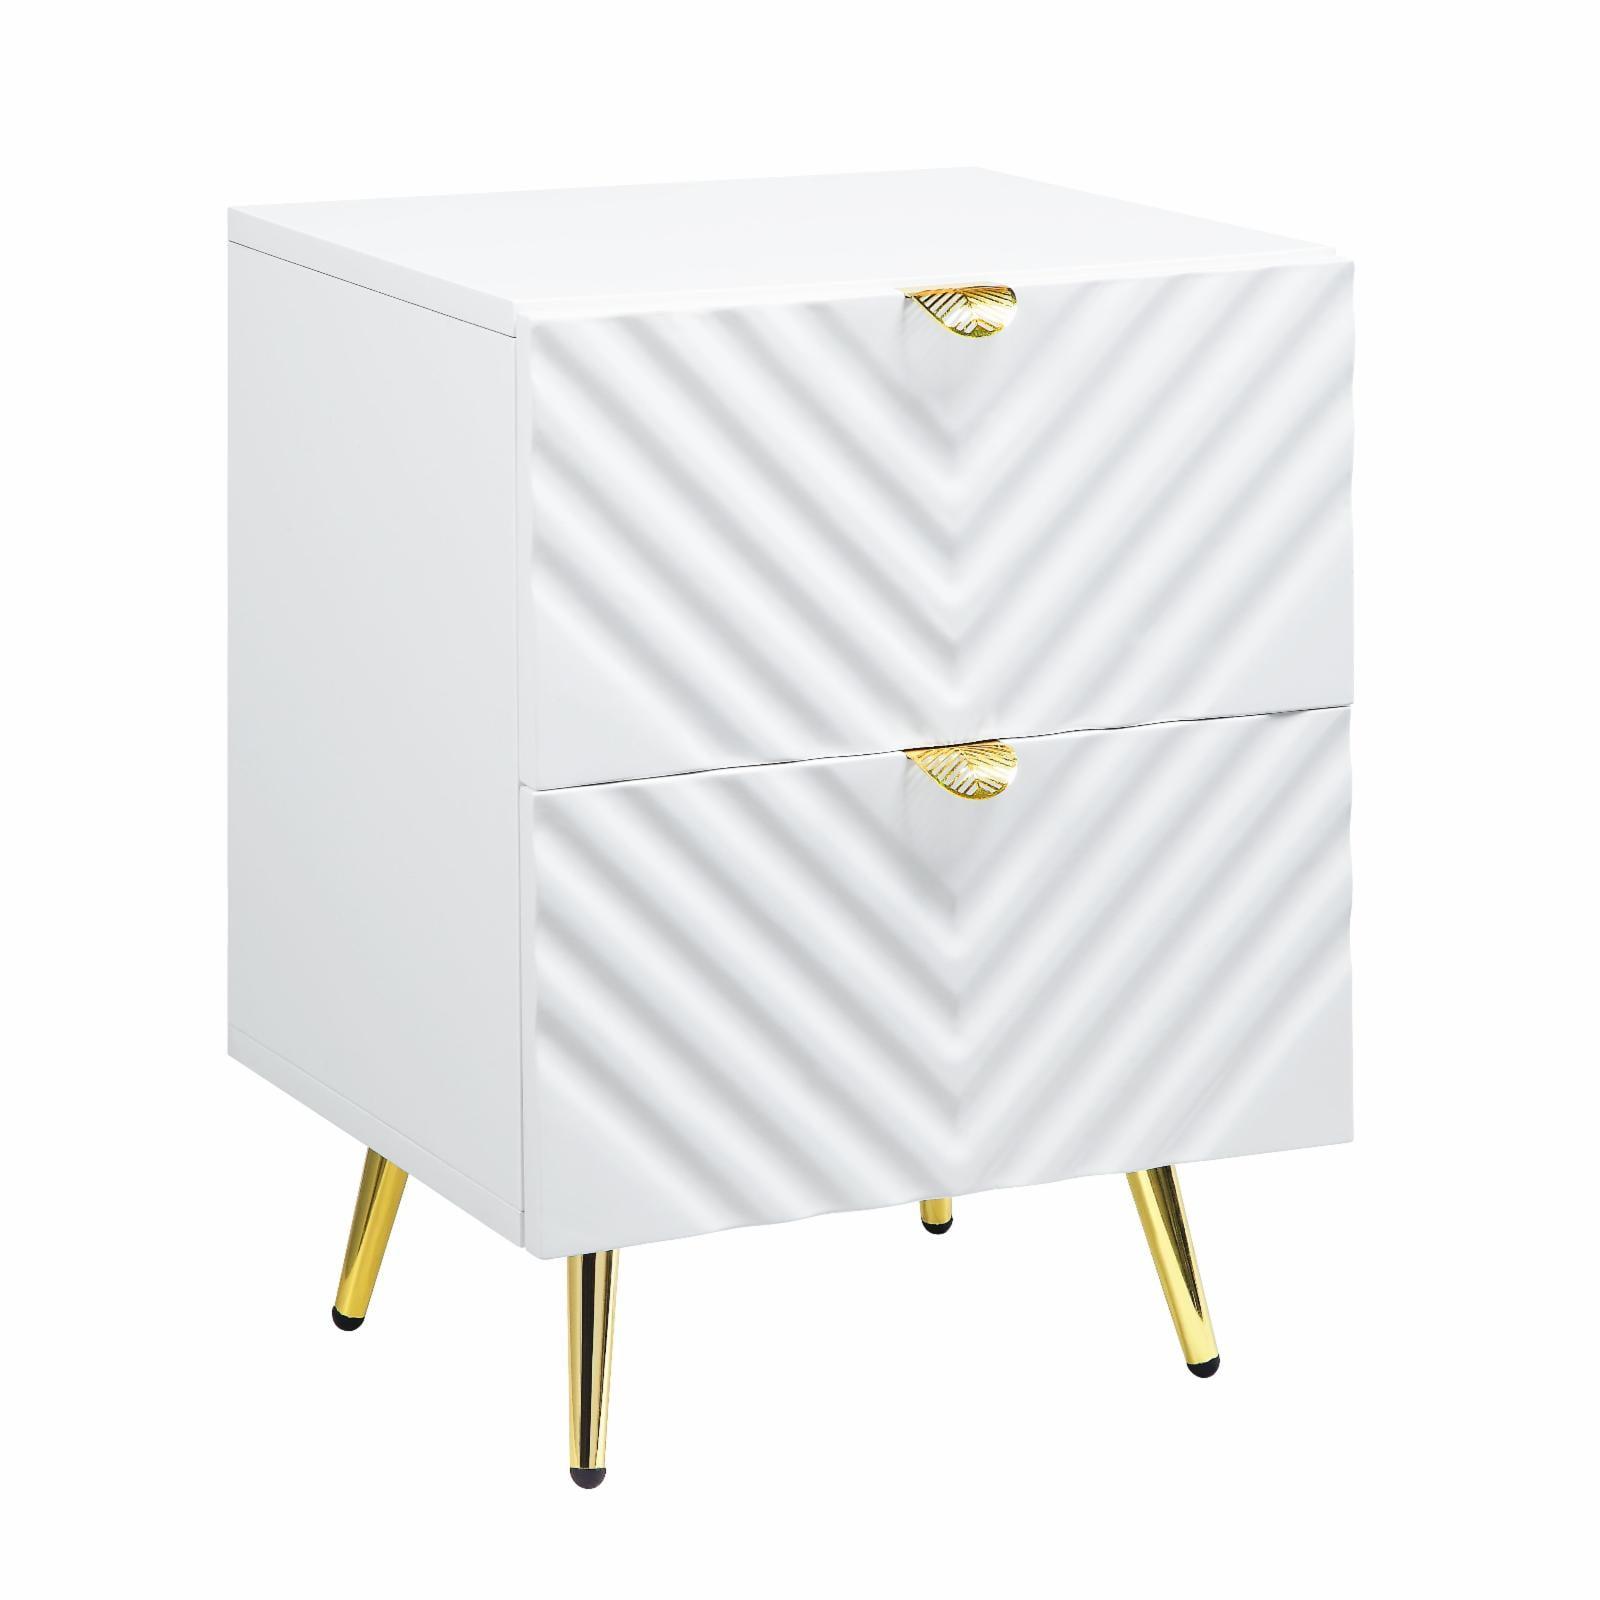 Gaines High Gloss White 2-Drawer Nightstand with Gold Accents